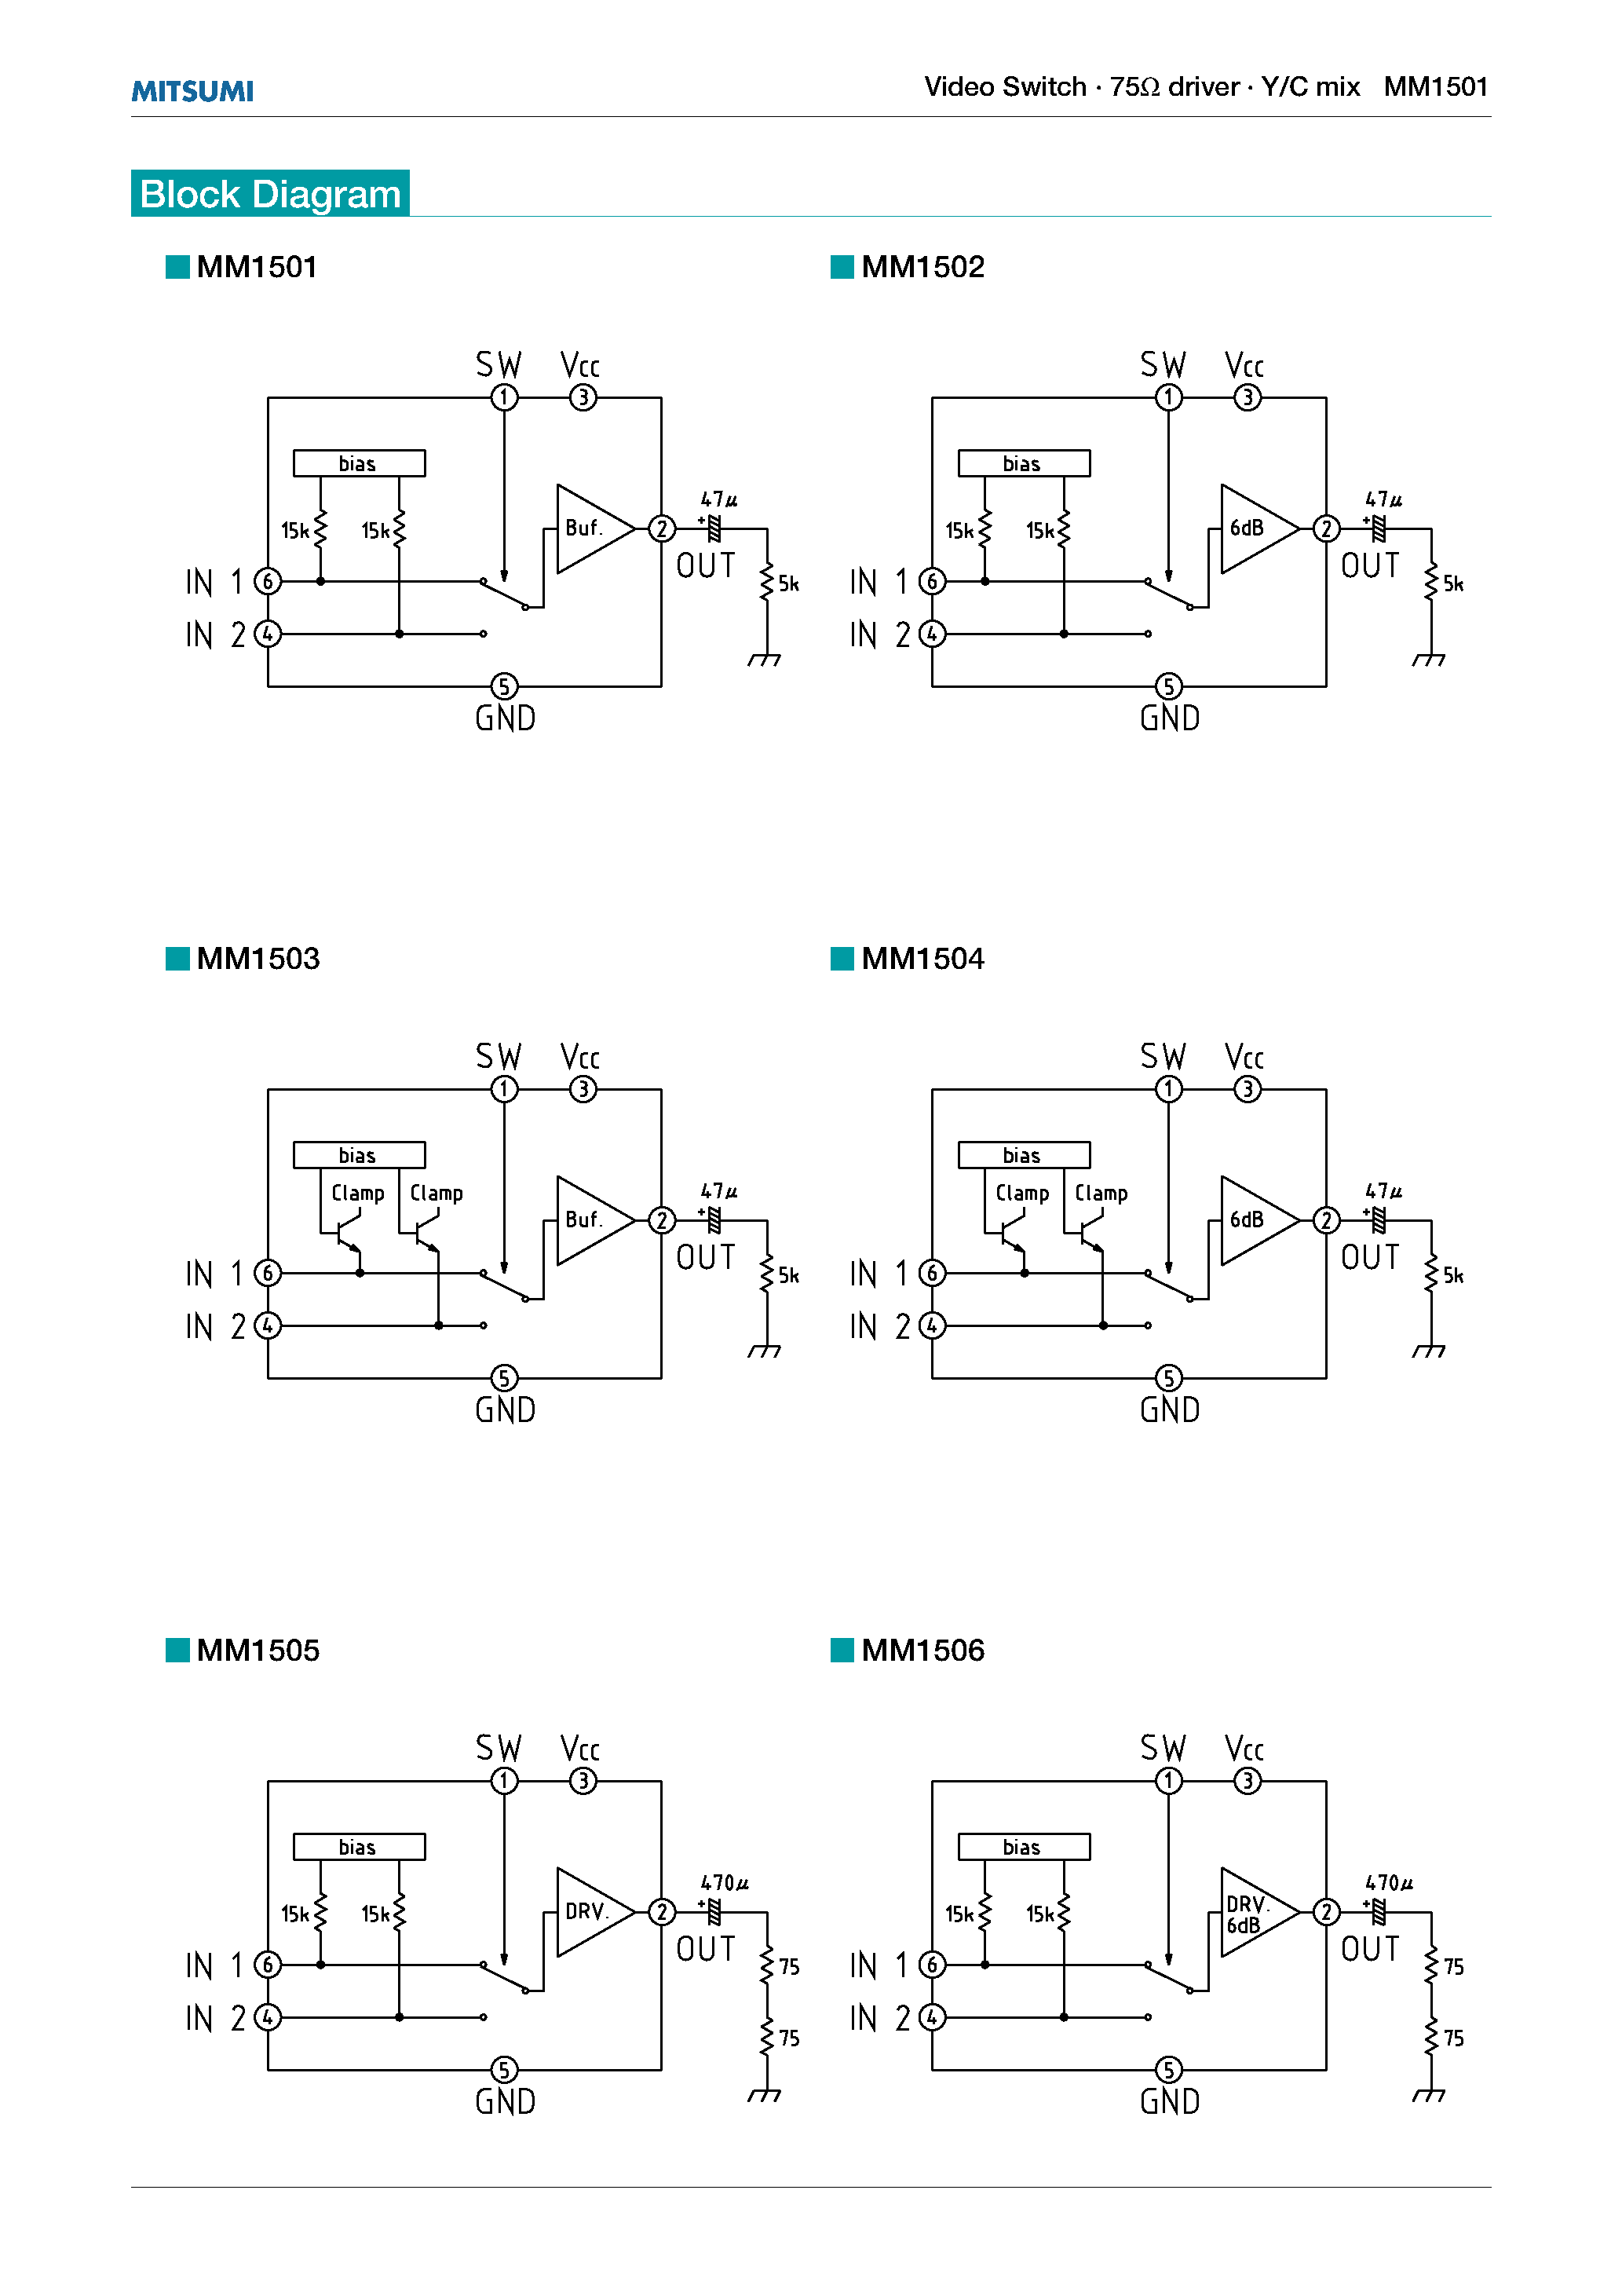 Datasheet MM1511 - Video Switch 75 driver Y/C mix page 2